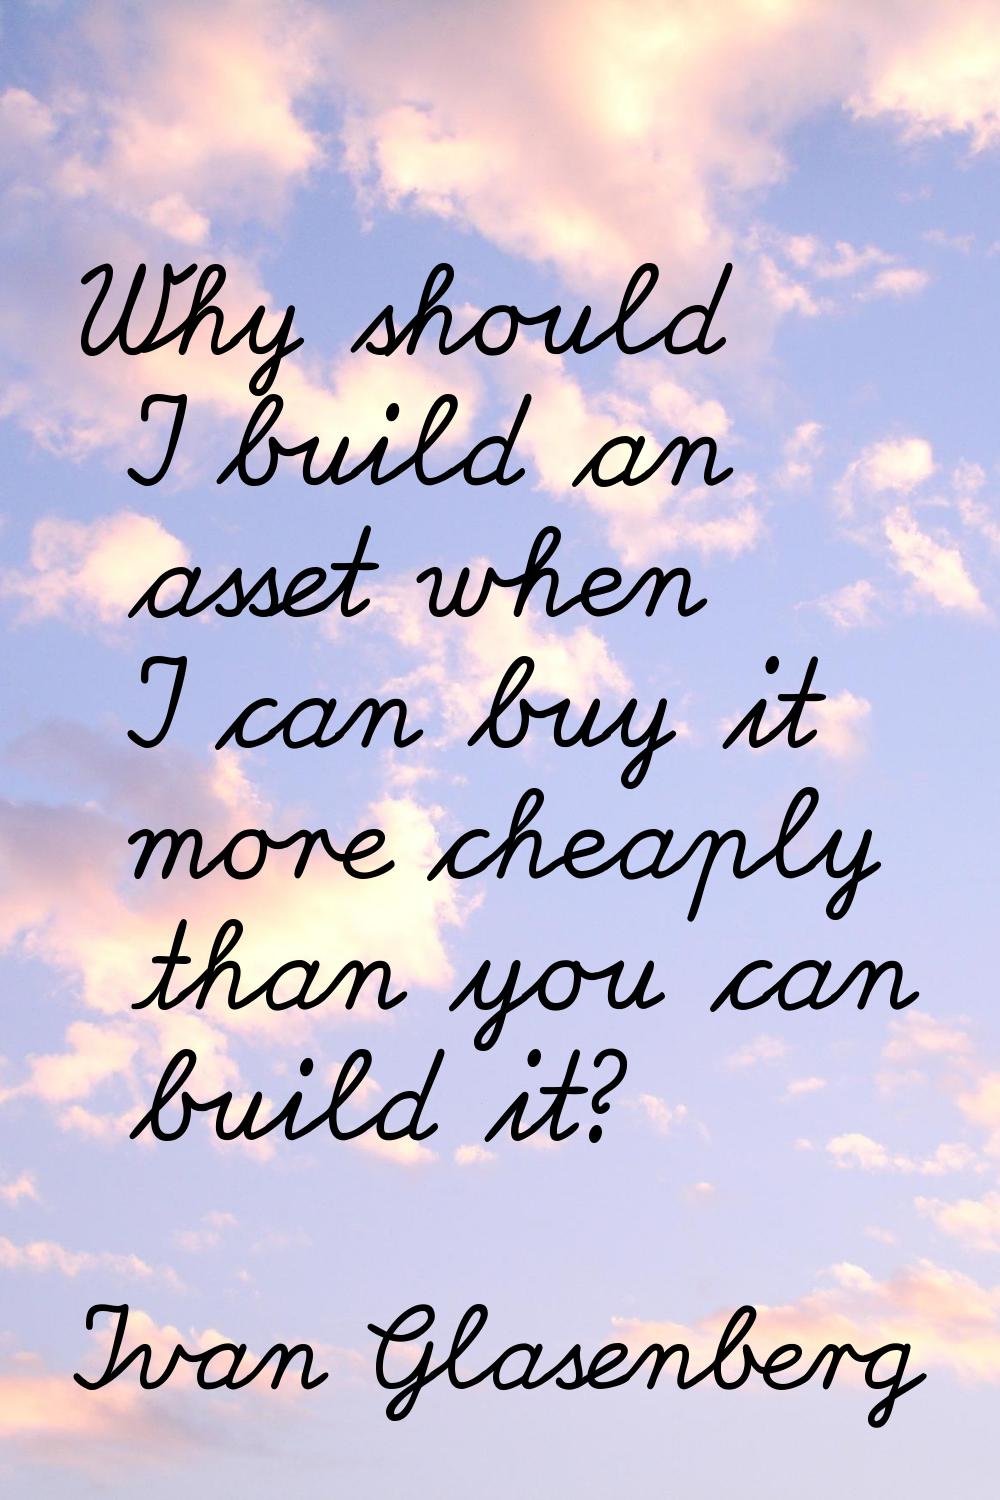 Why should I build an asset when I can buy it more cheaply than you can build it?